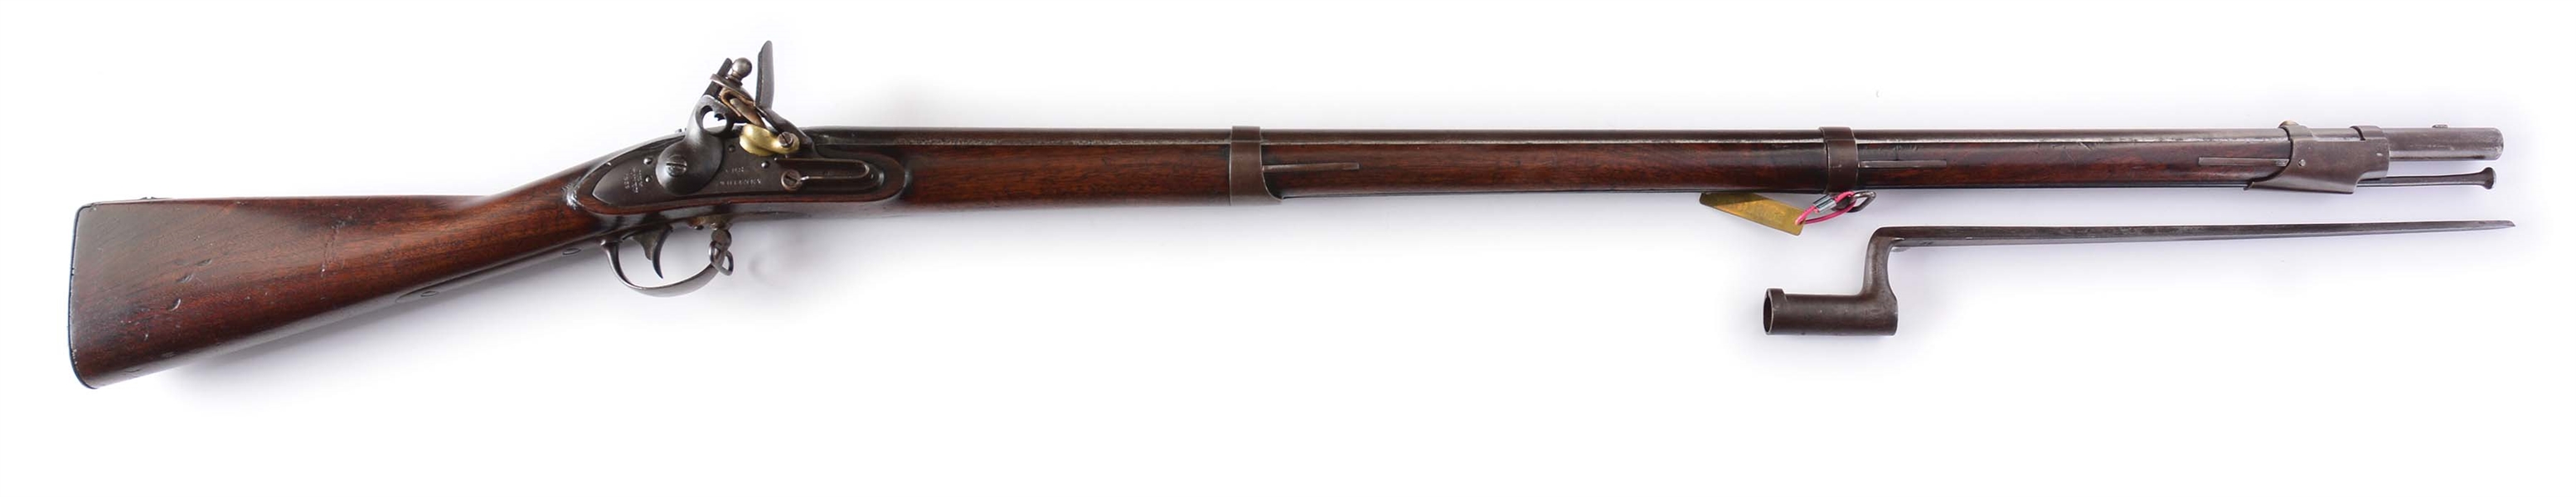 (A) WHITNEY MODEL 1816 FLINTLOCK MUSKET DATED 1839 WITH BAYONET.